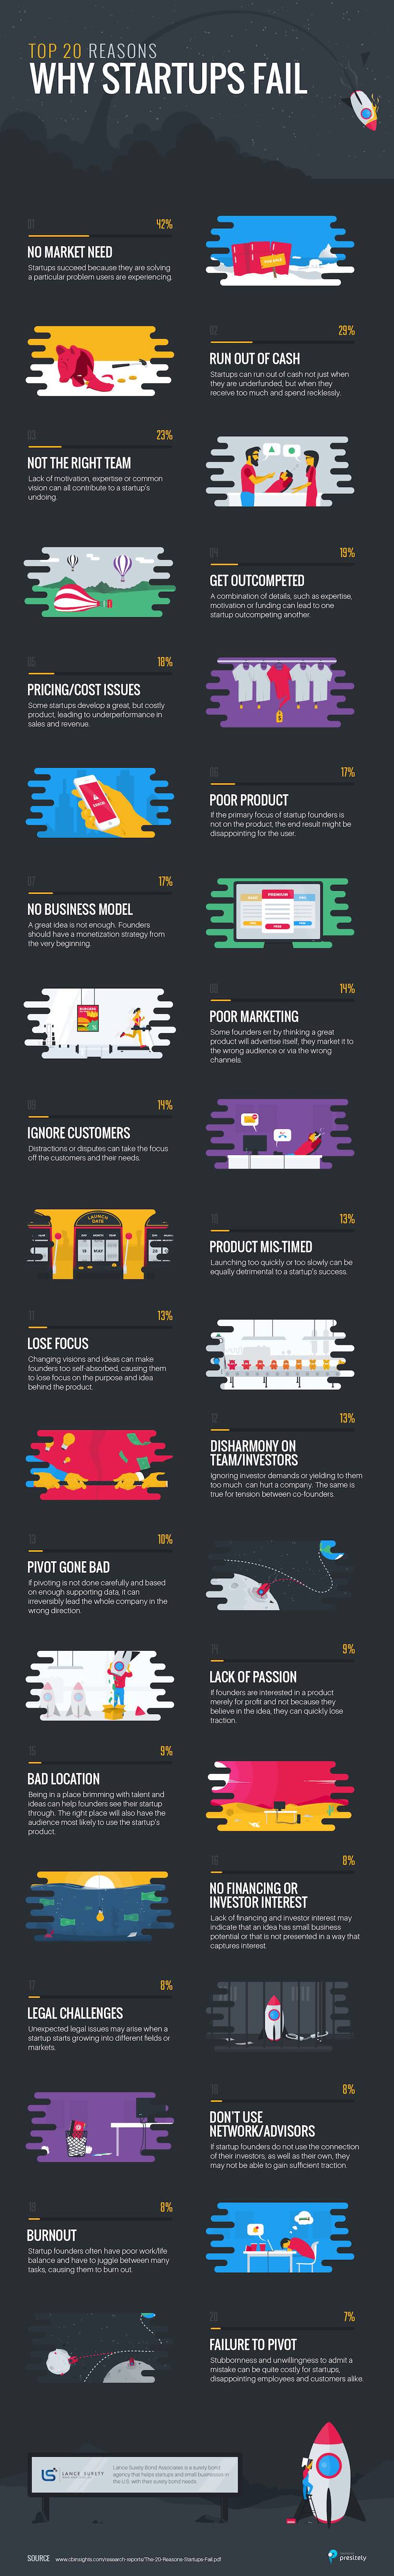 Why Startups Fail Infographic